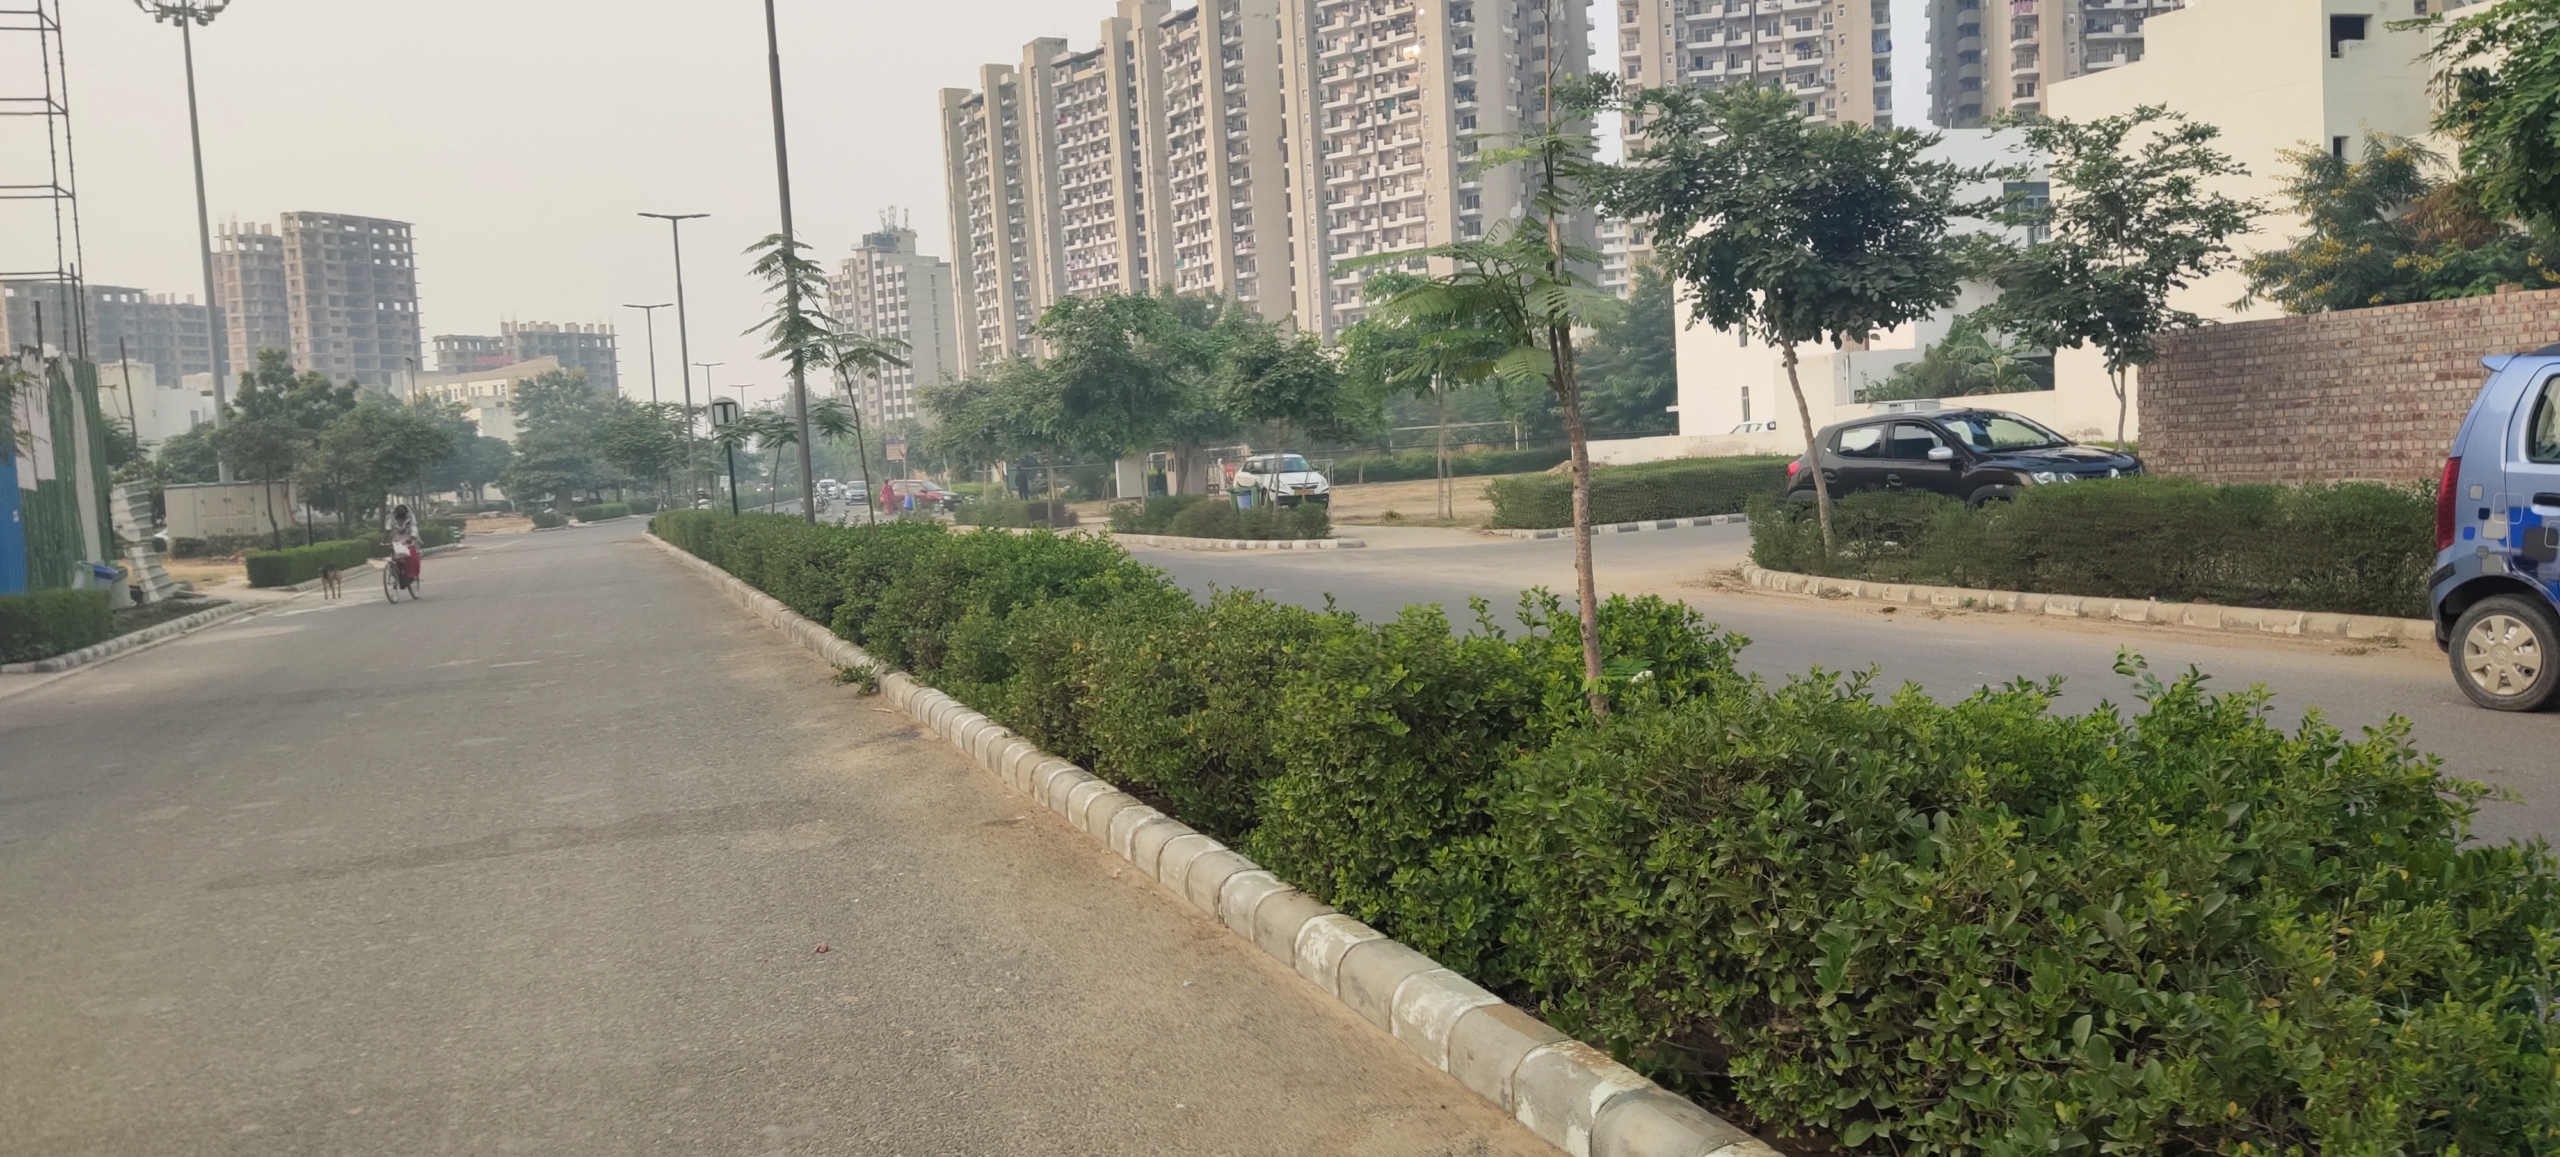 Residential Land Plots Site for sale in gurgaon